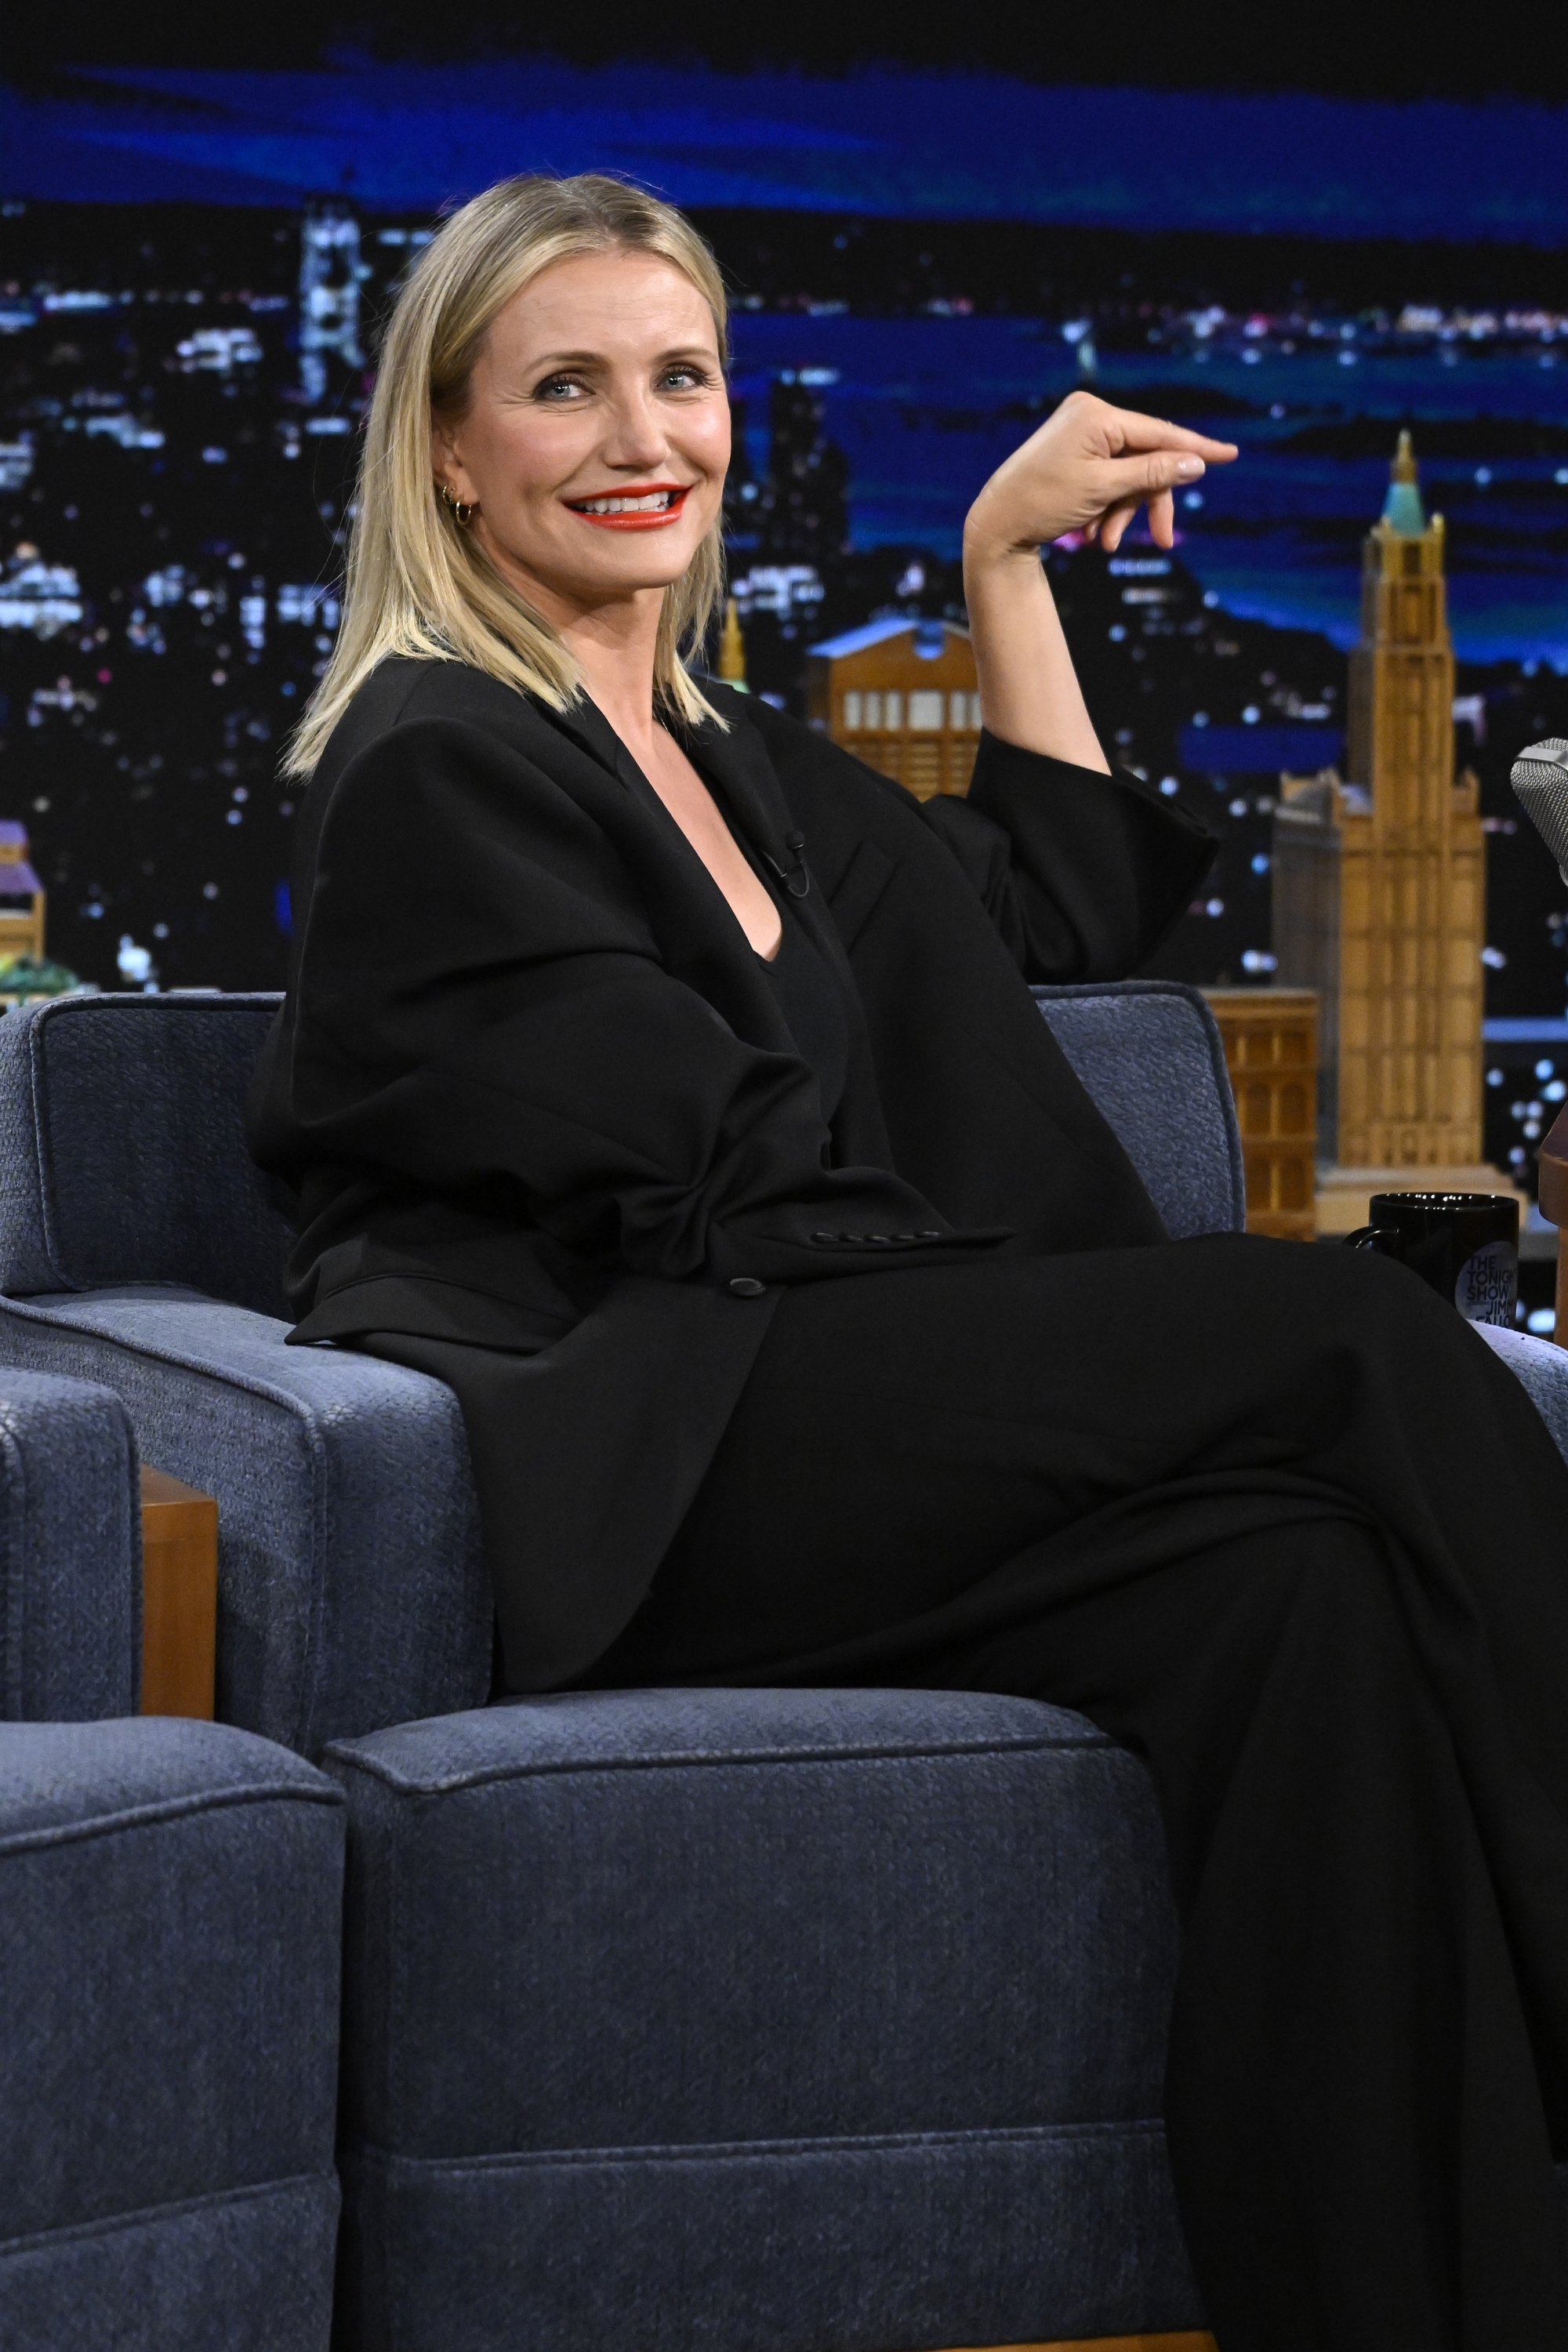 Woman in a black suit sits on a chair on a talk show set, smiling and pointing to her side